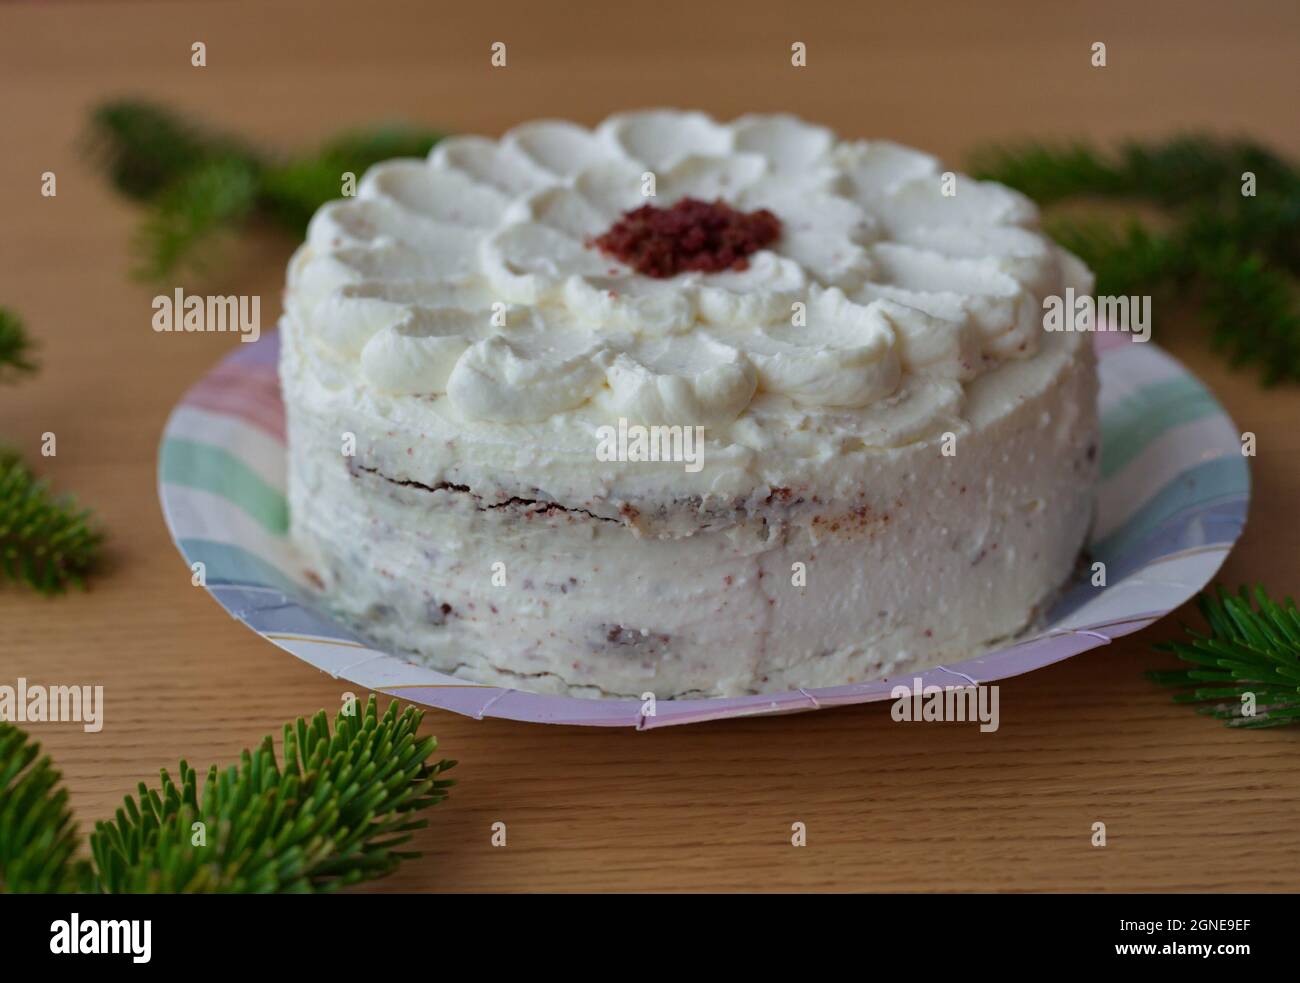 White cake on table with fir branches Stock Photo